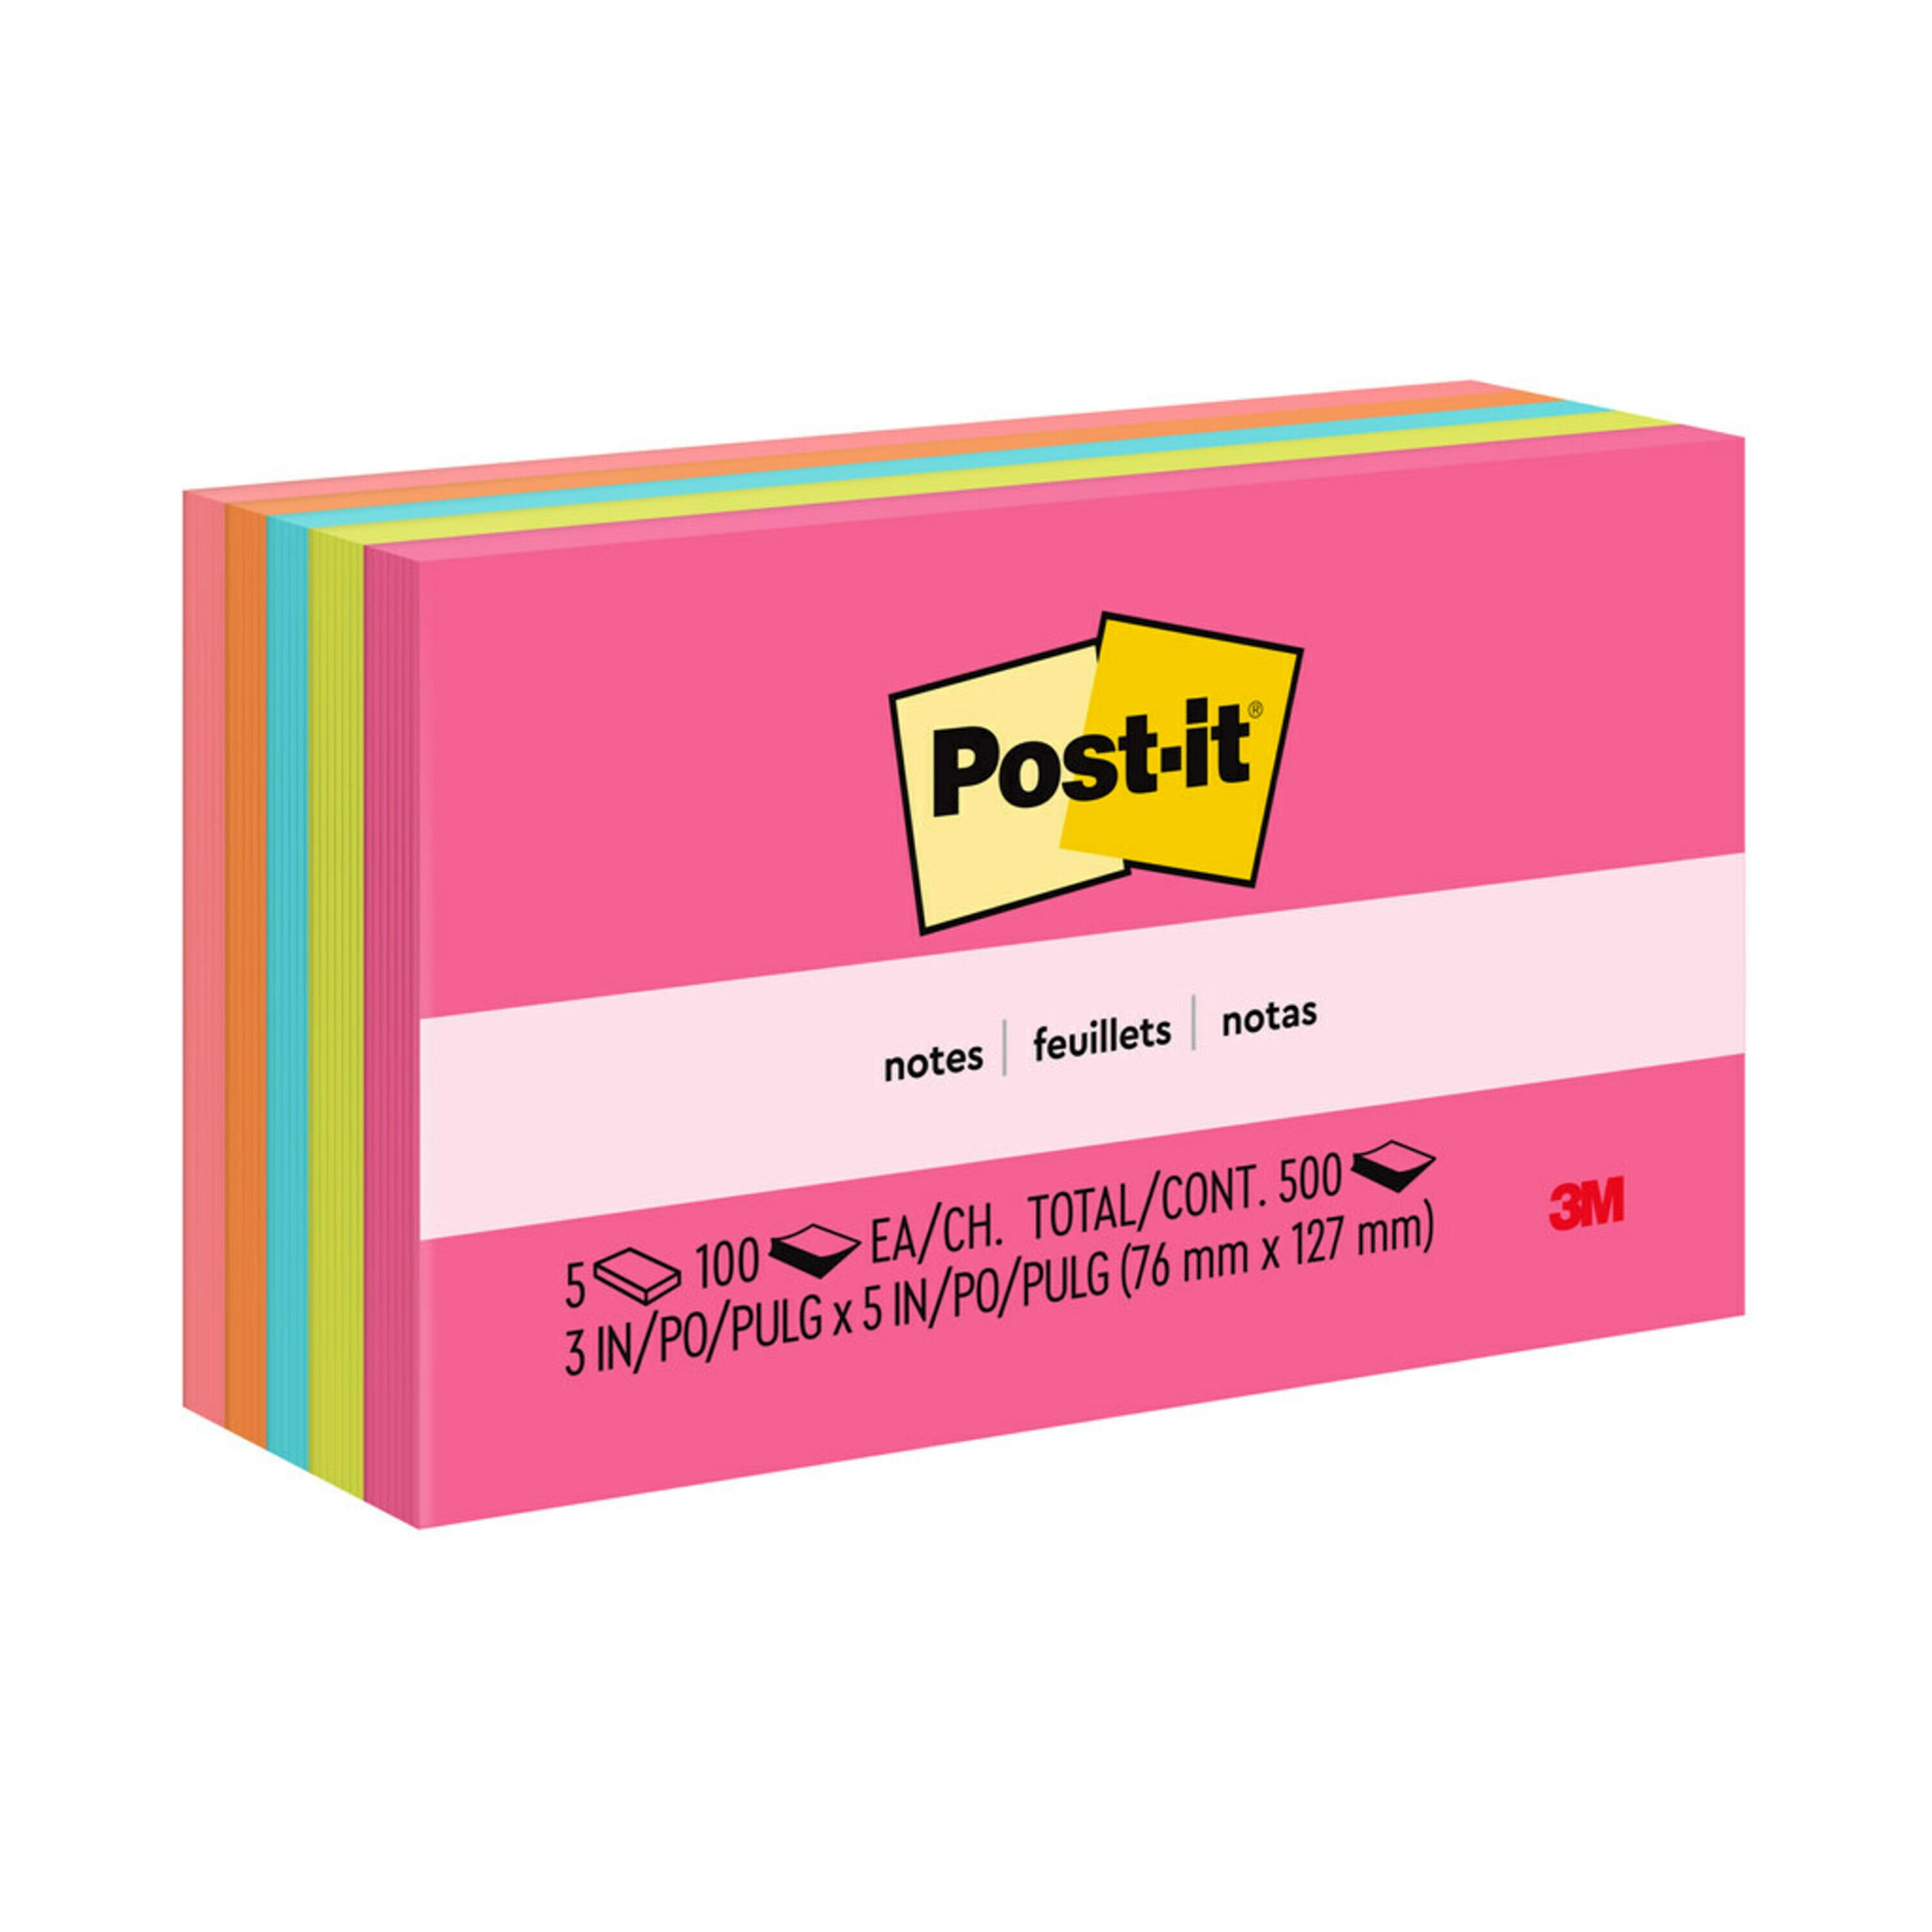 600 Sheets Transparent Sticky Notes 3x3 inch,12 Packs Pastel